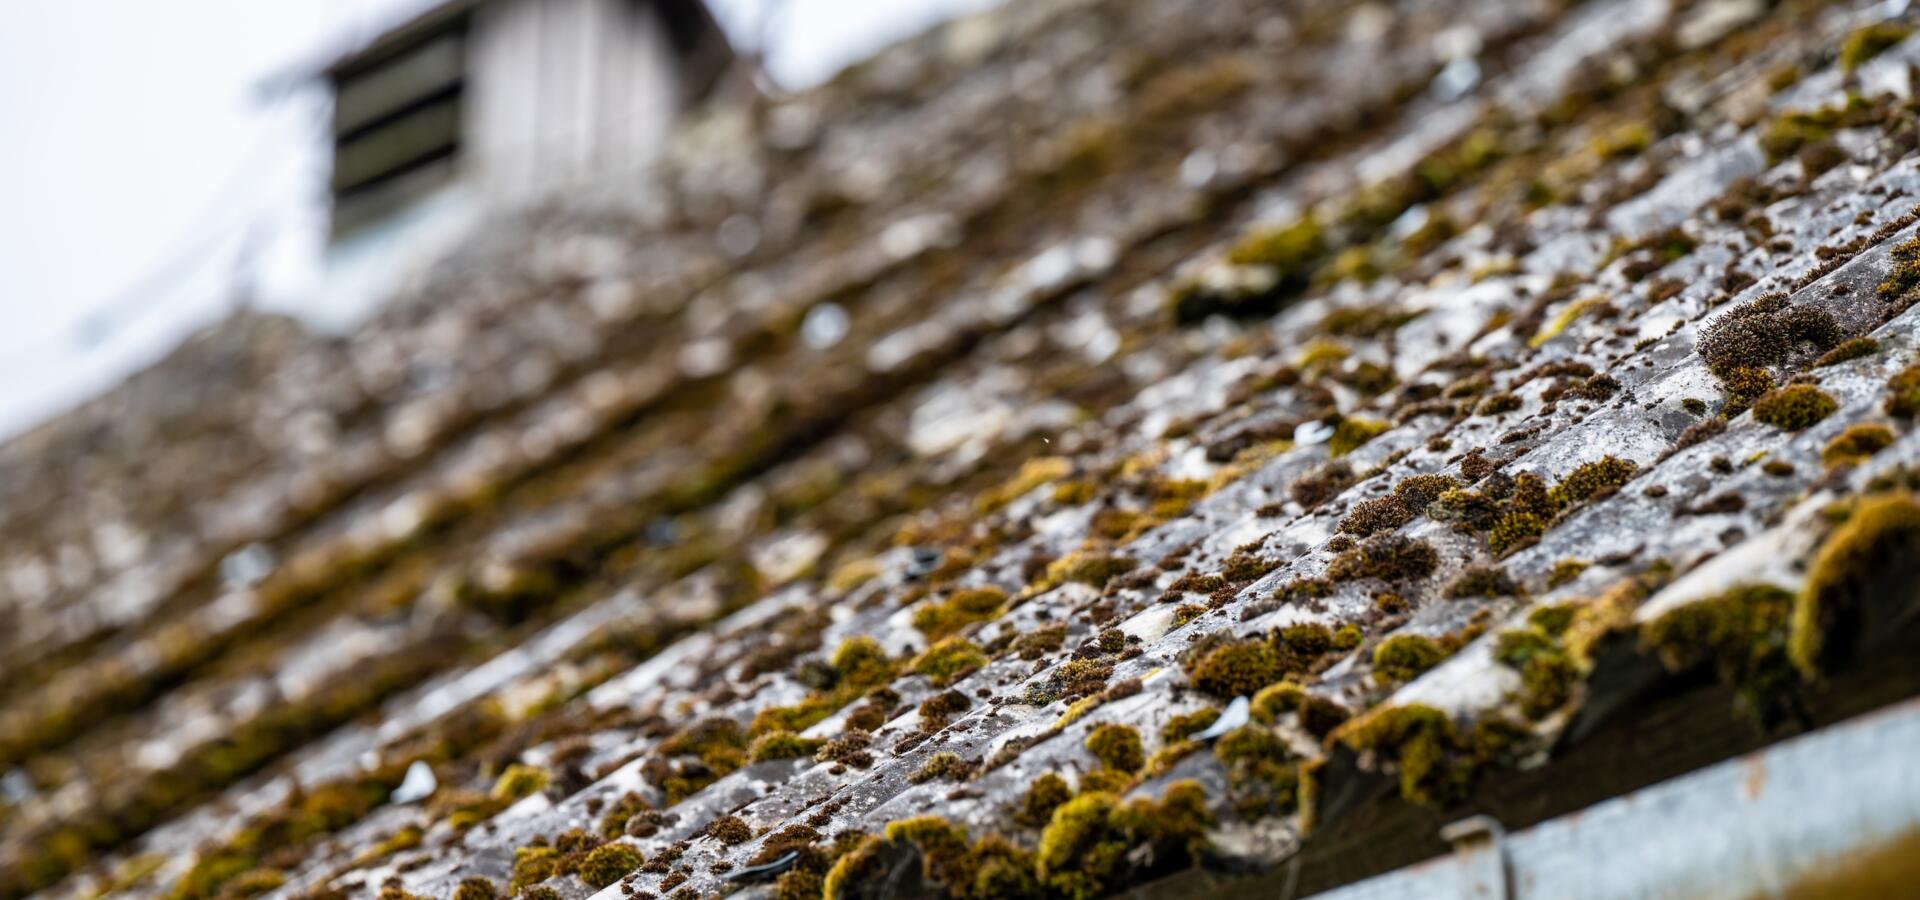 Moss growing on asbestos cement corrugated roof